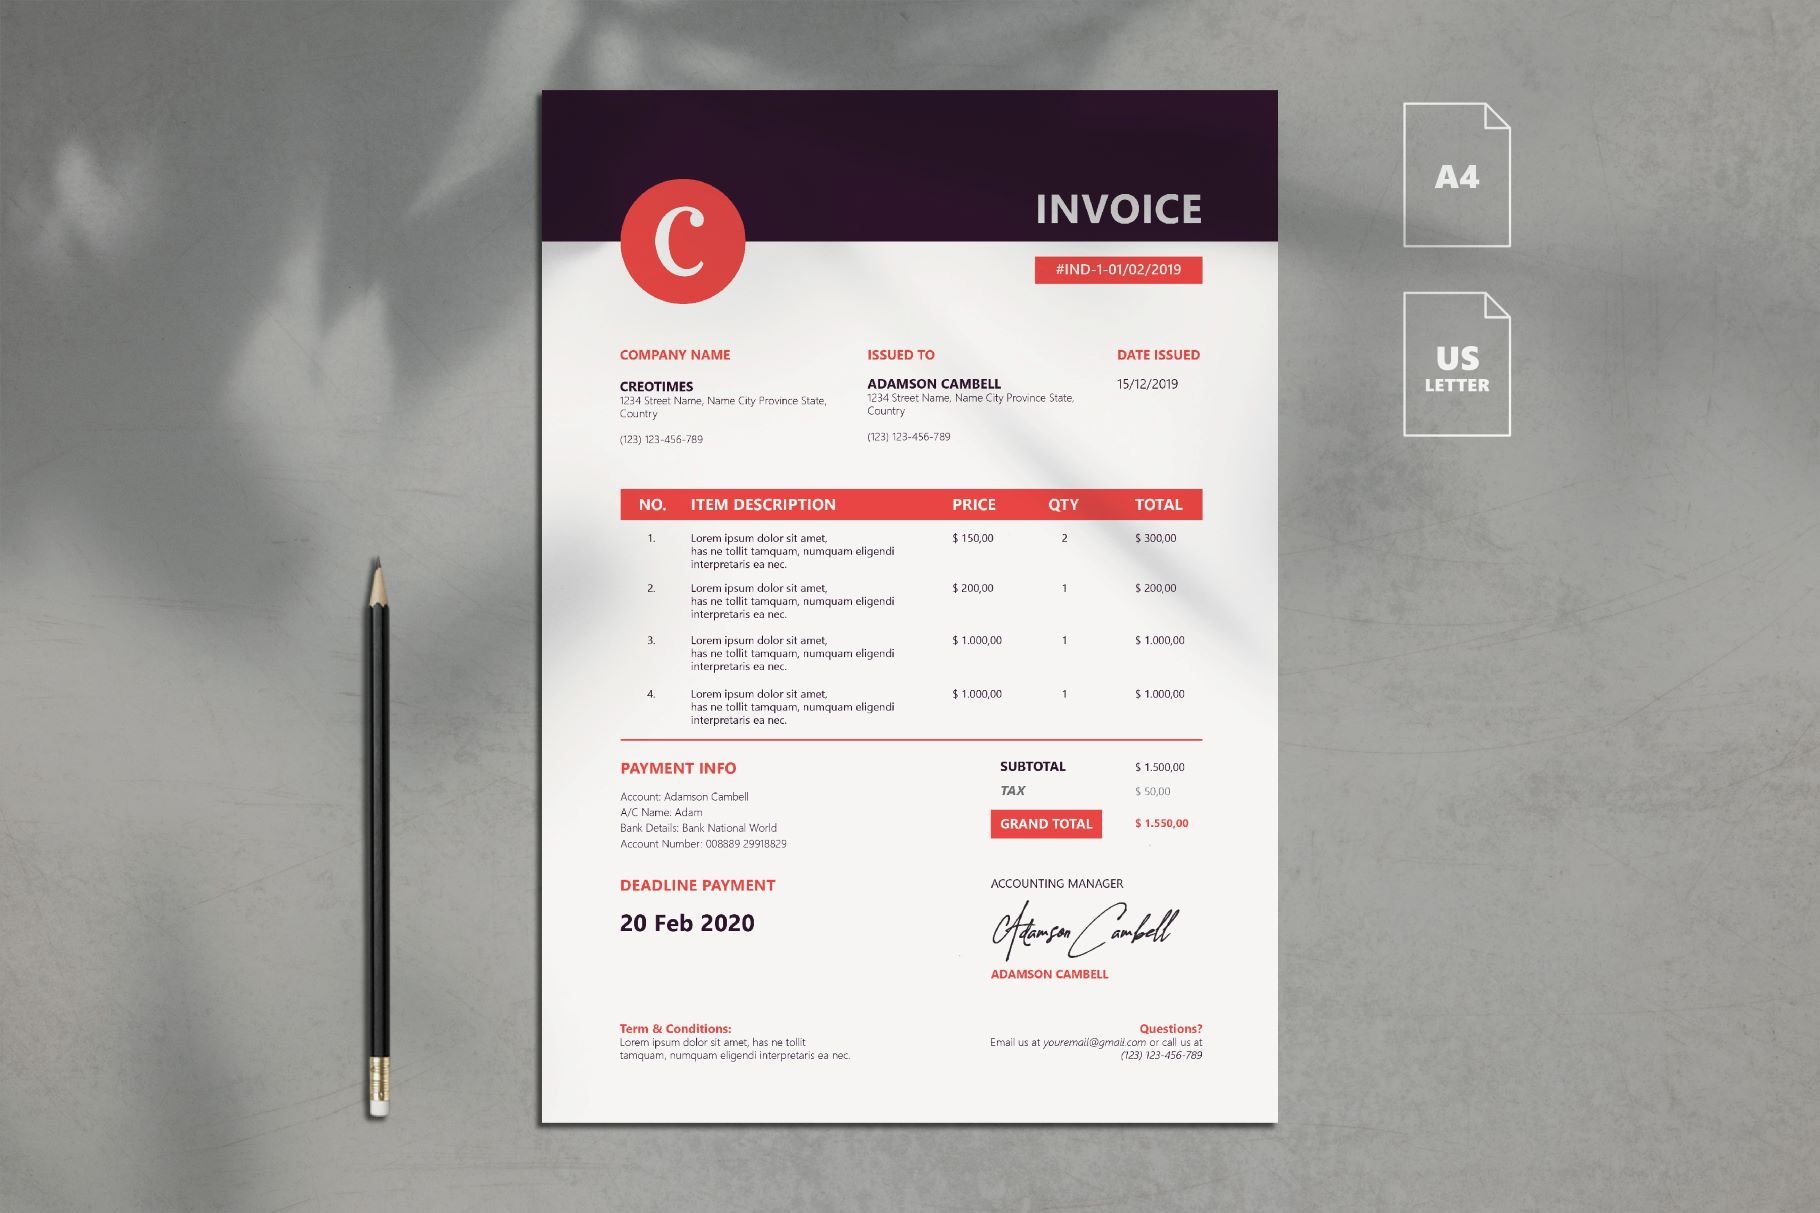 Business Invoice Template Vol. 4 cover image.